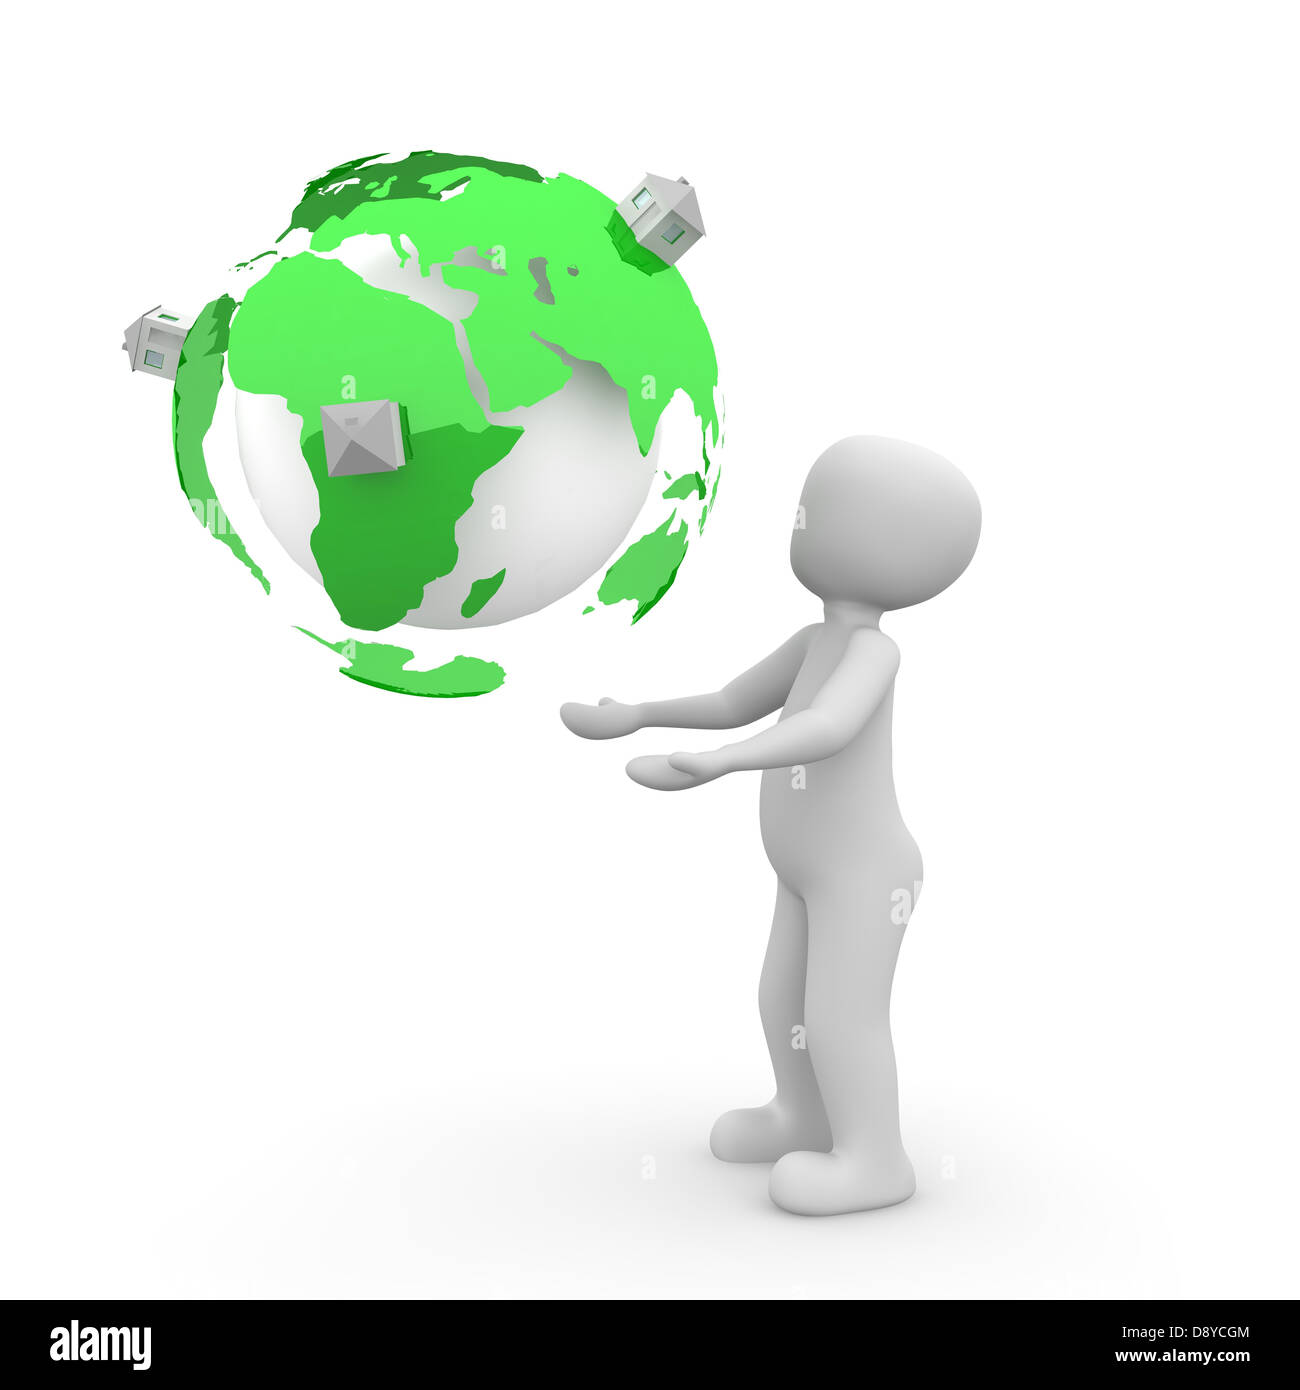 The green color globe is covered with small enclosures. Stock Photo